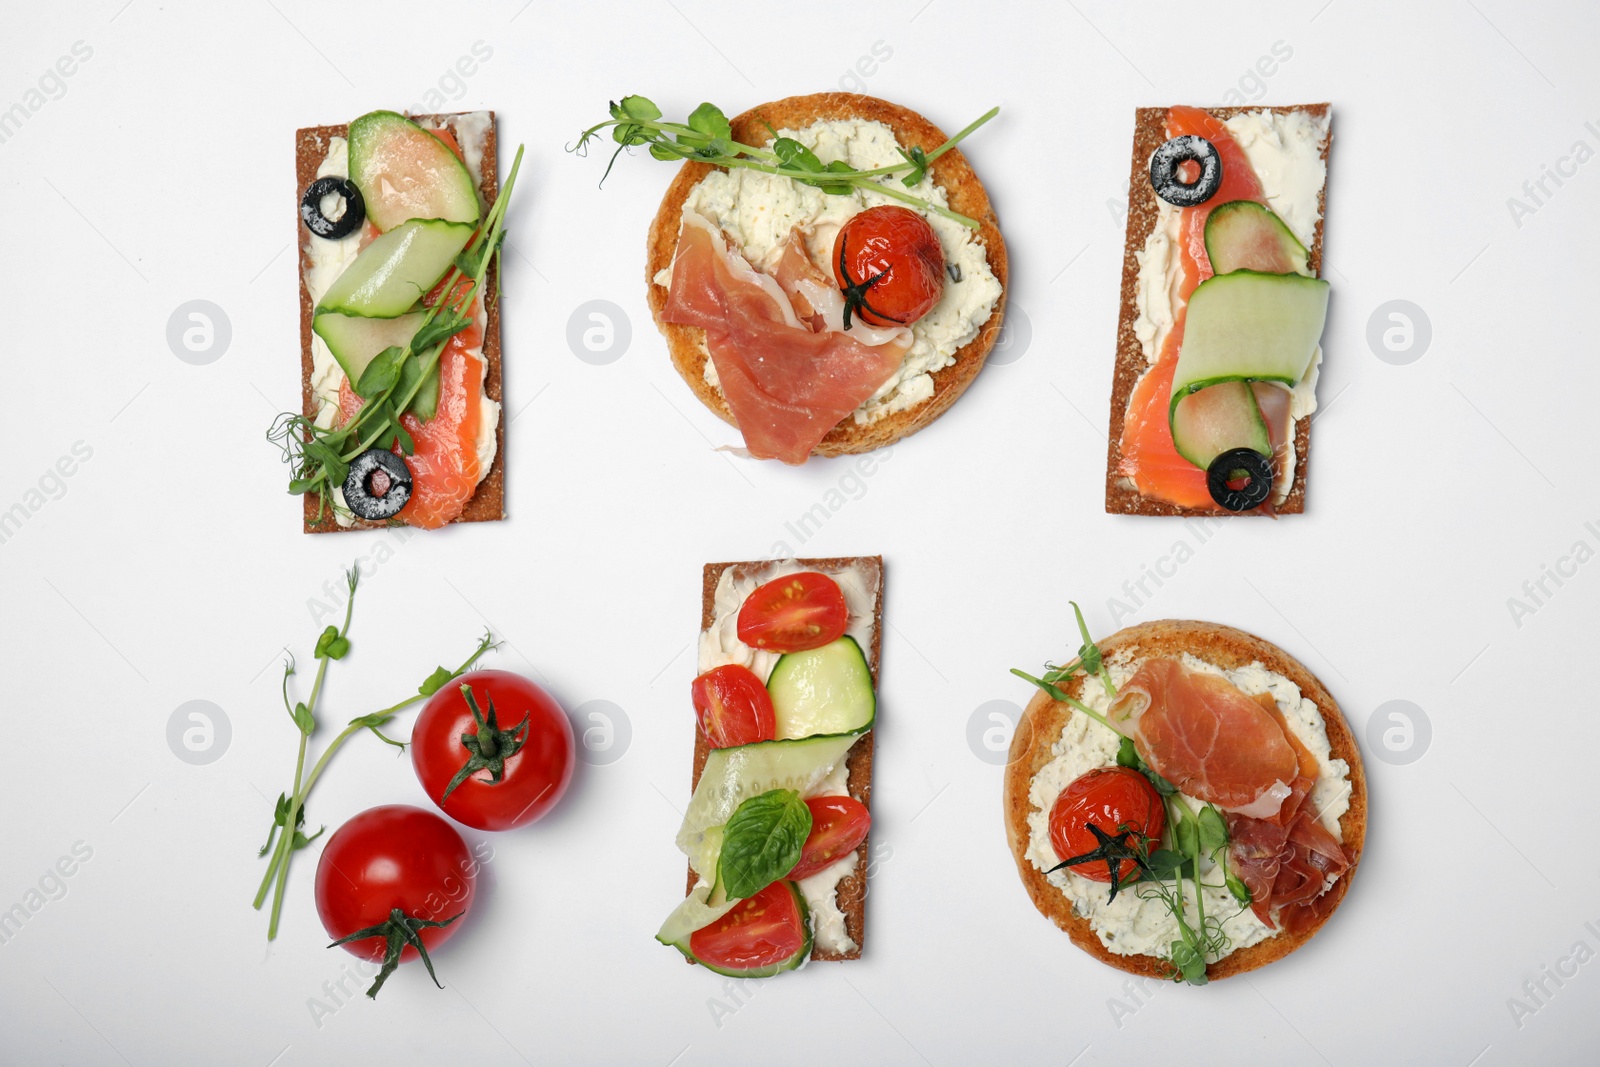 Photo of Tasty rusks and rye crispbreads with different toppings on white background, top view